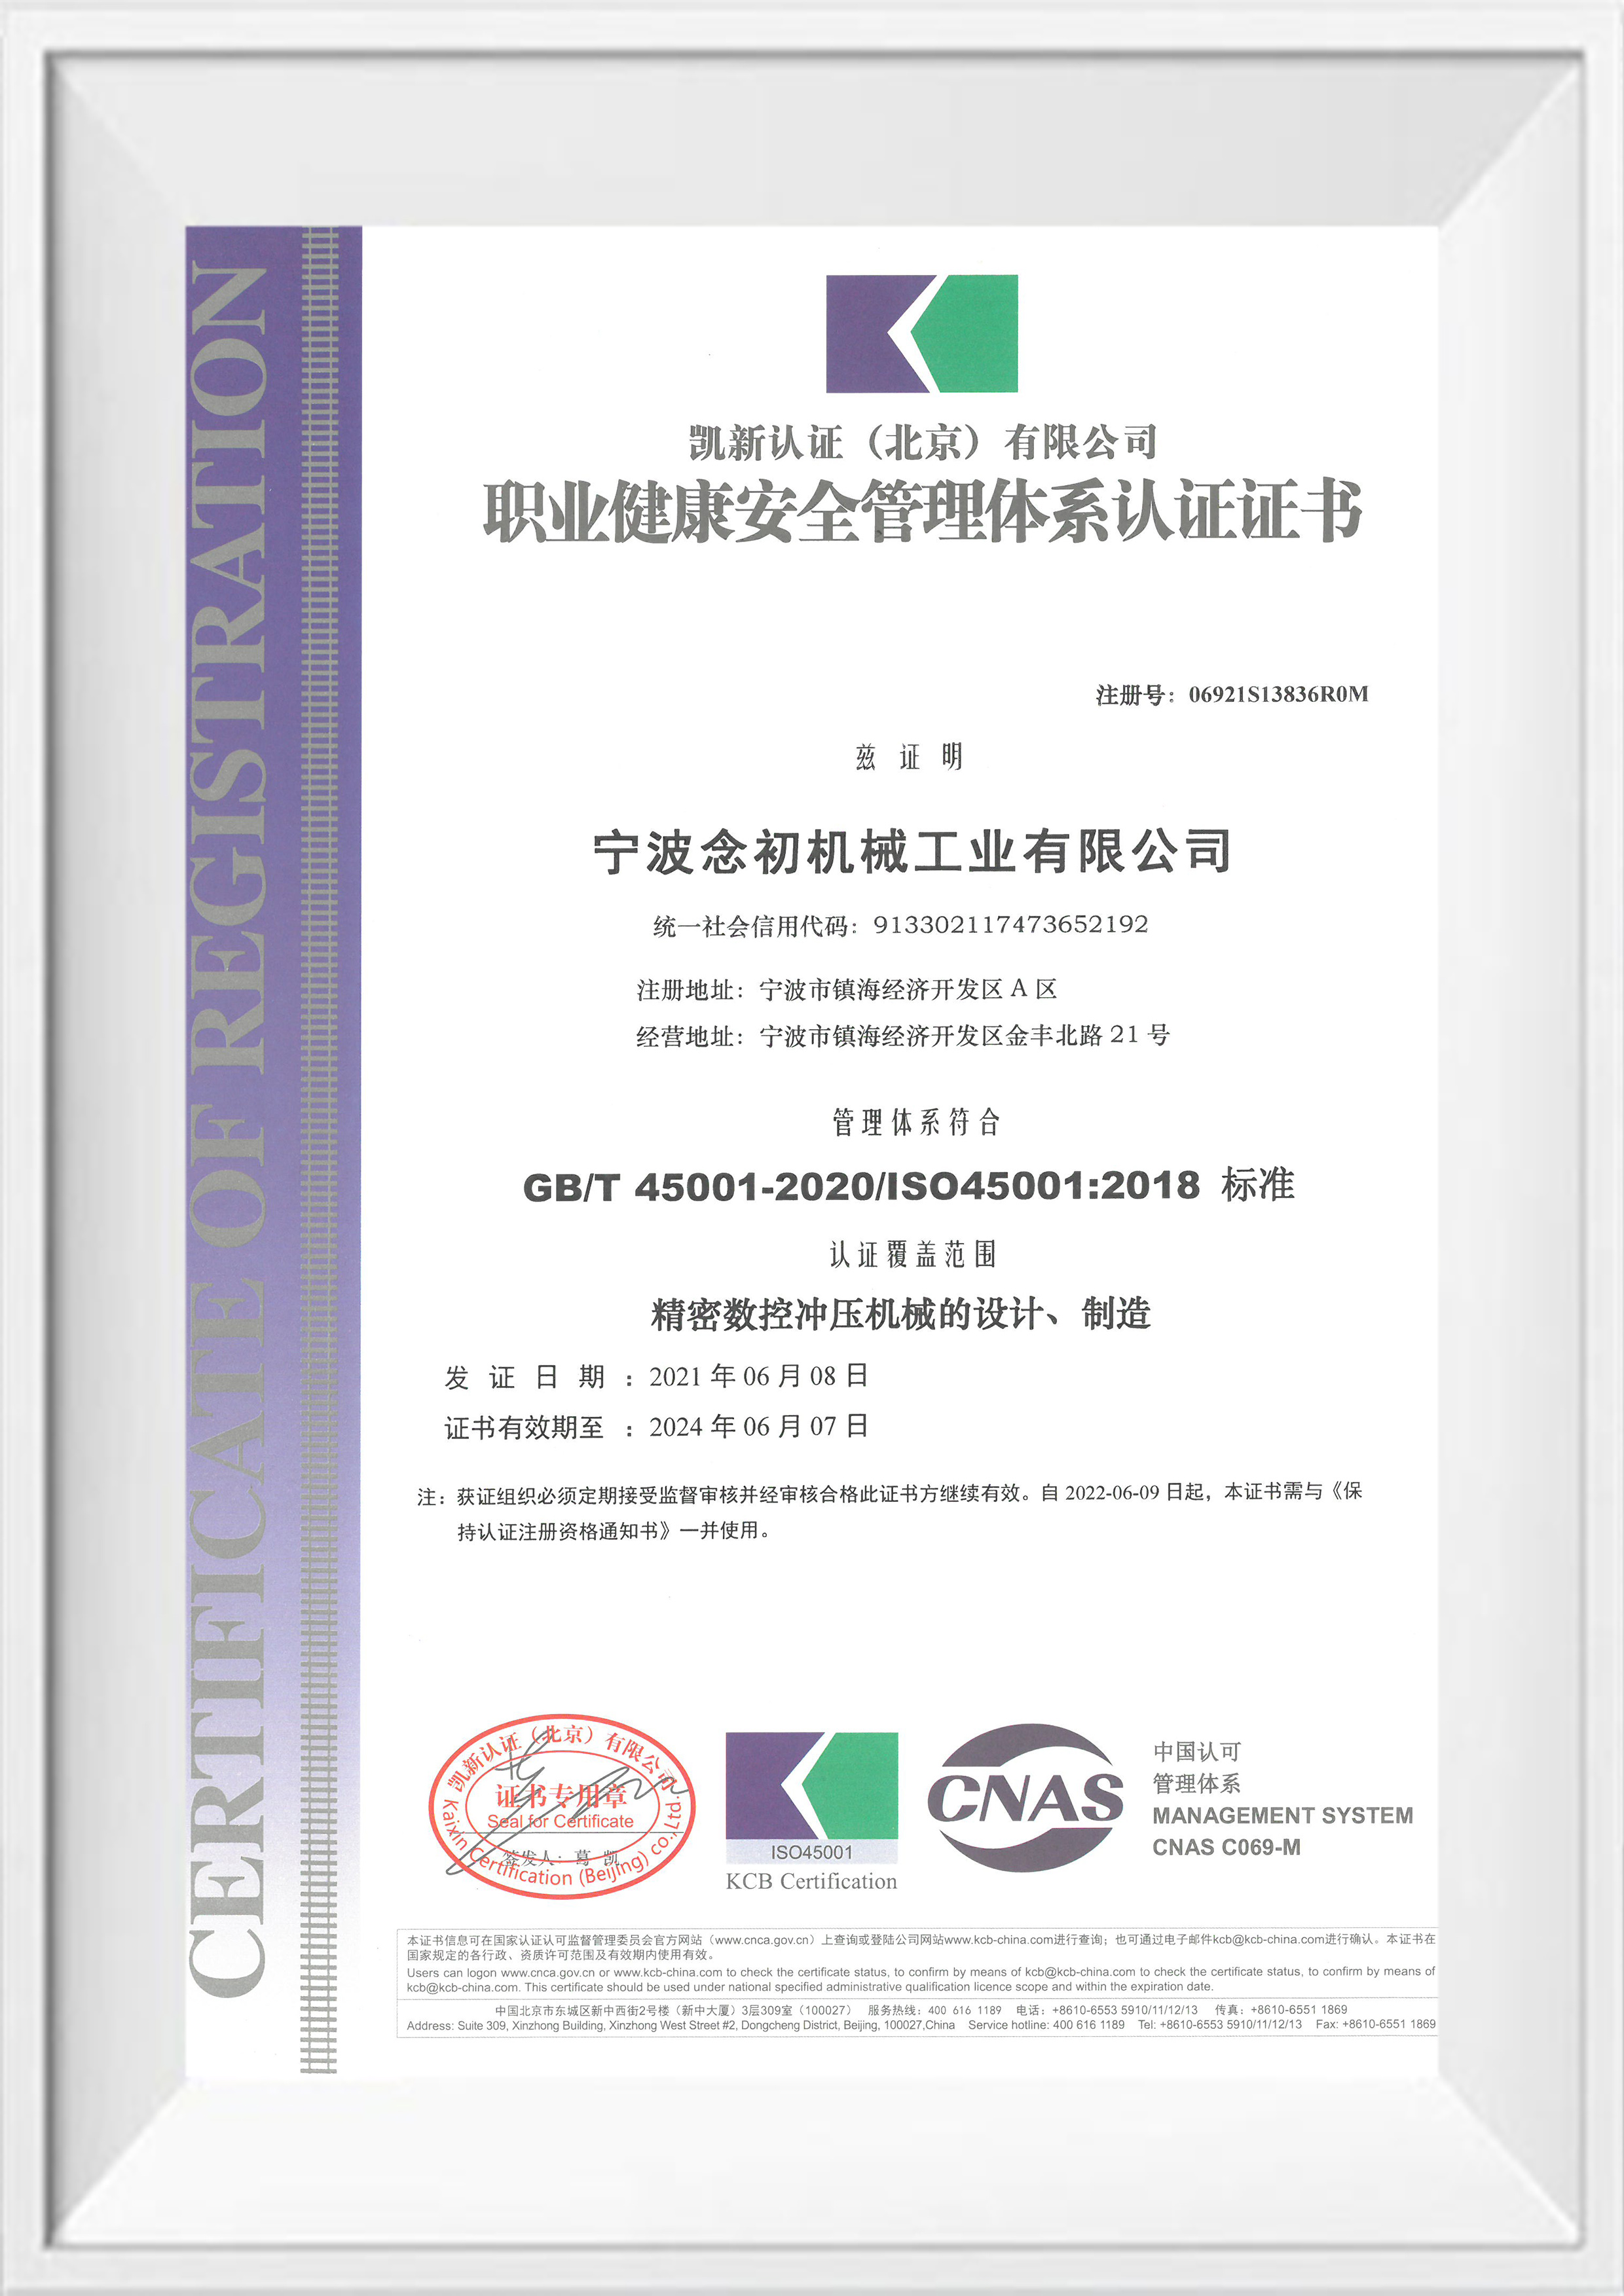 ISO45001 Occupational Health and Safety Management System